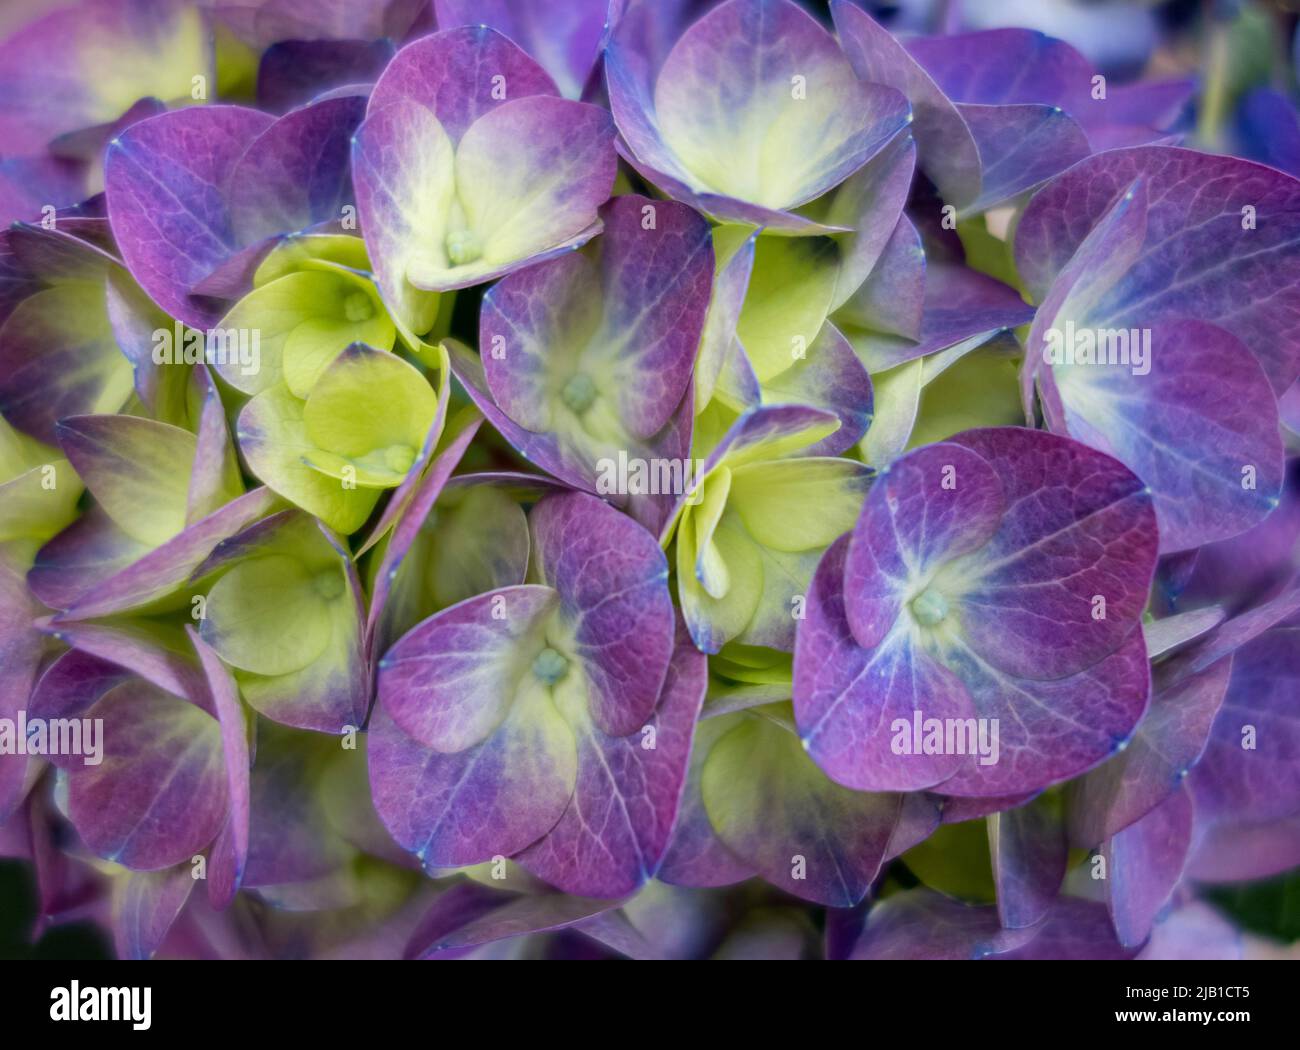 Full frame violet and yellow bicolor hortensia flowers closeup Stock Photo